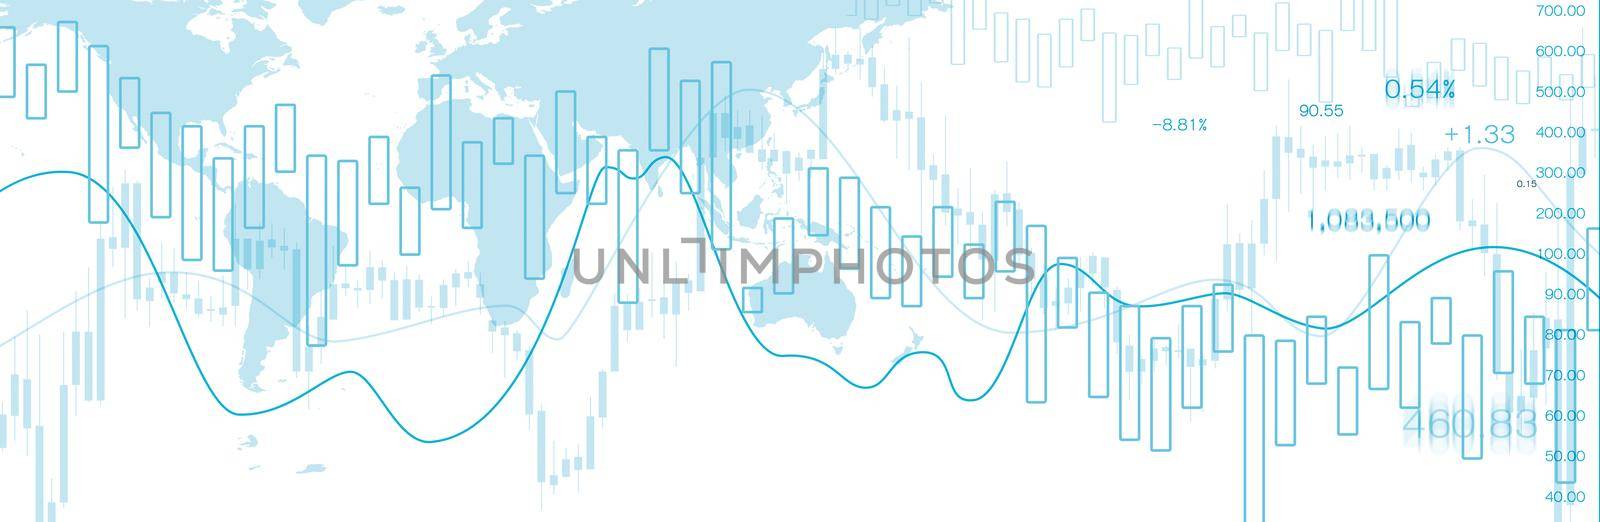 Stock market graph or forex trading chart for business and financial concepts. Abstract finance background investment or Economic trends business idea. Stock market data. illustration.